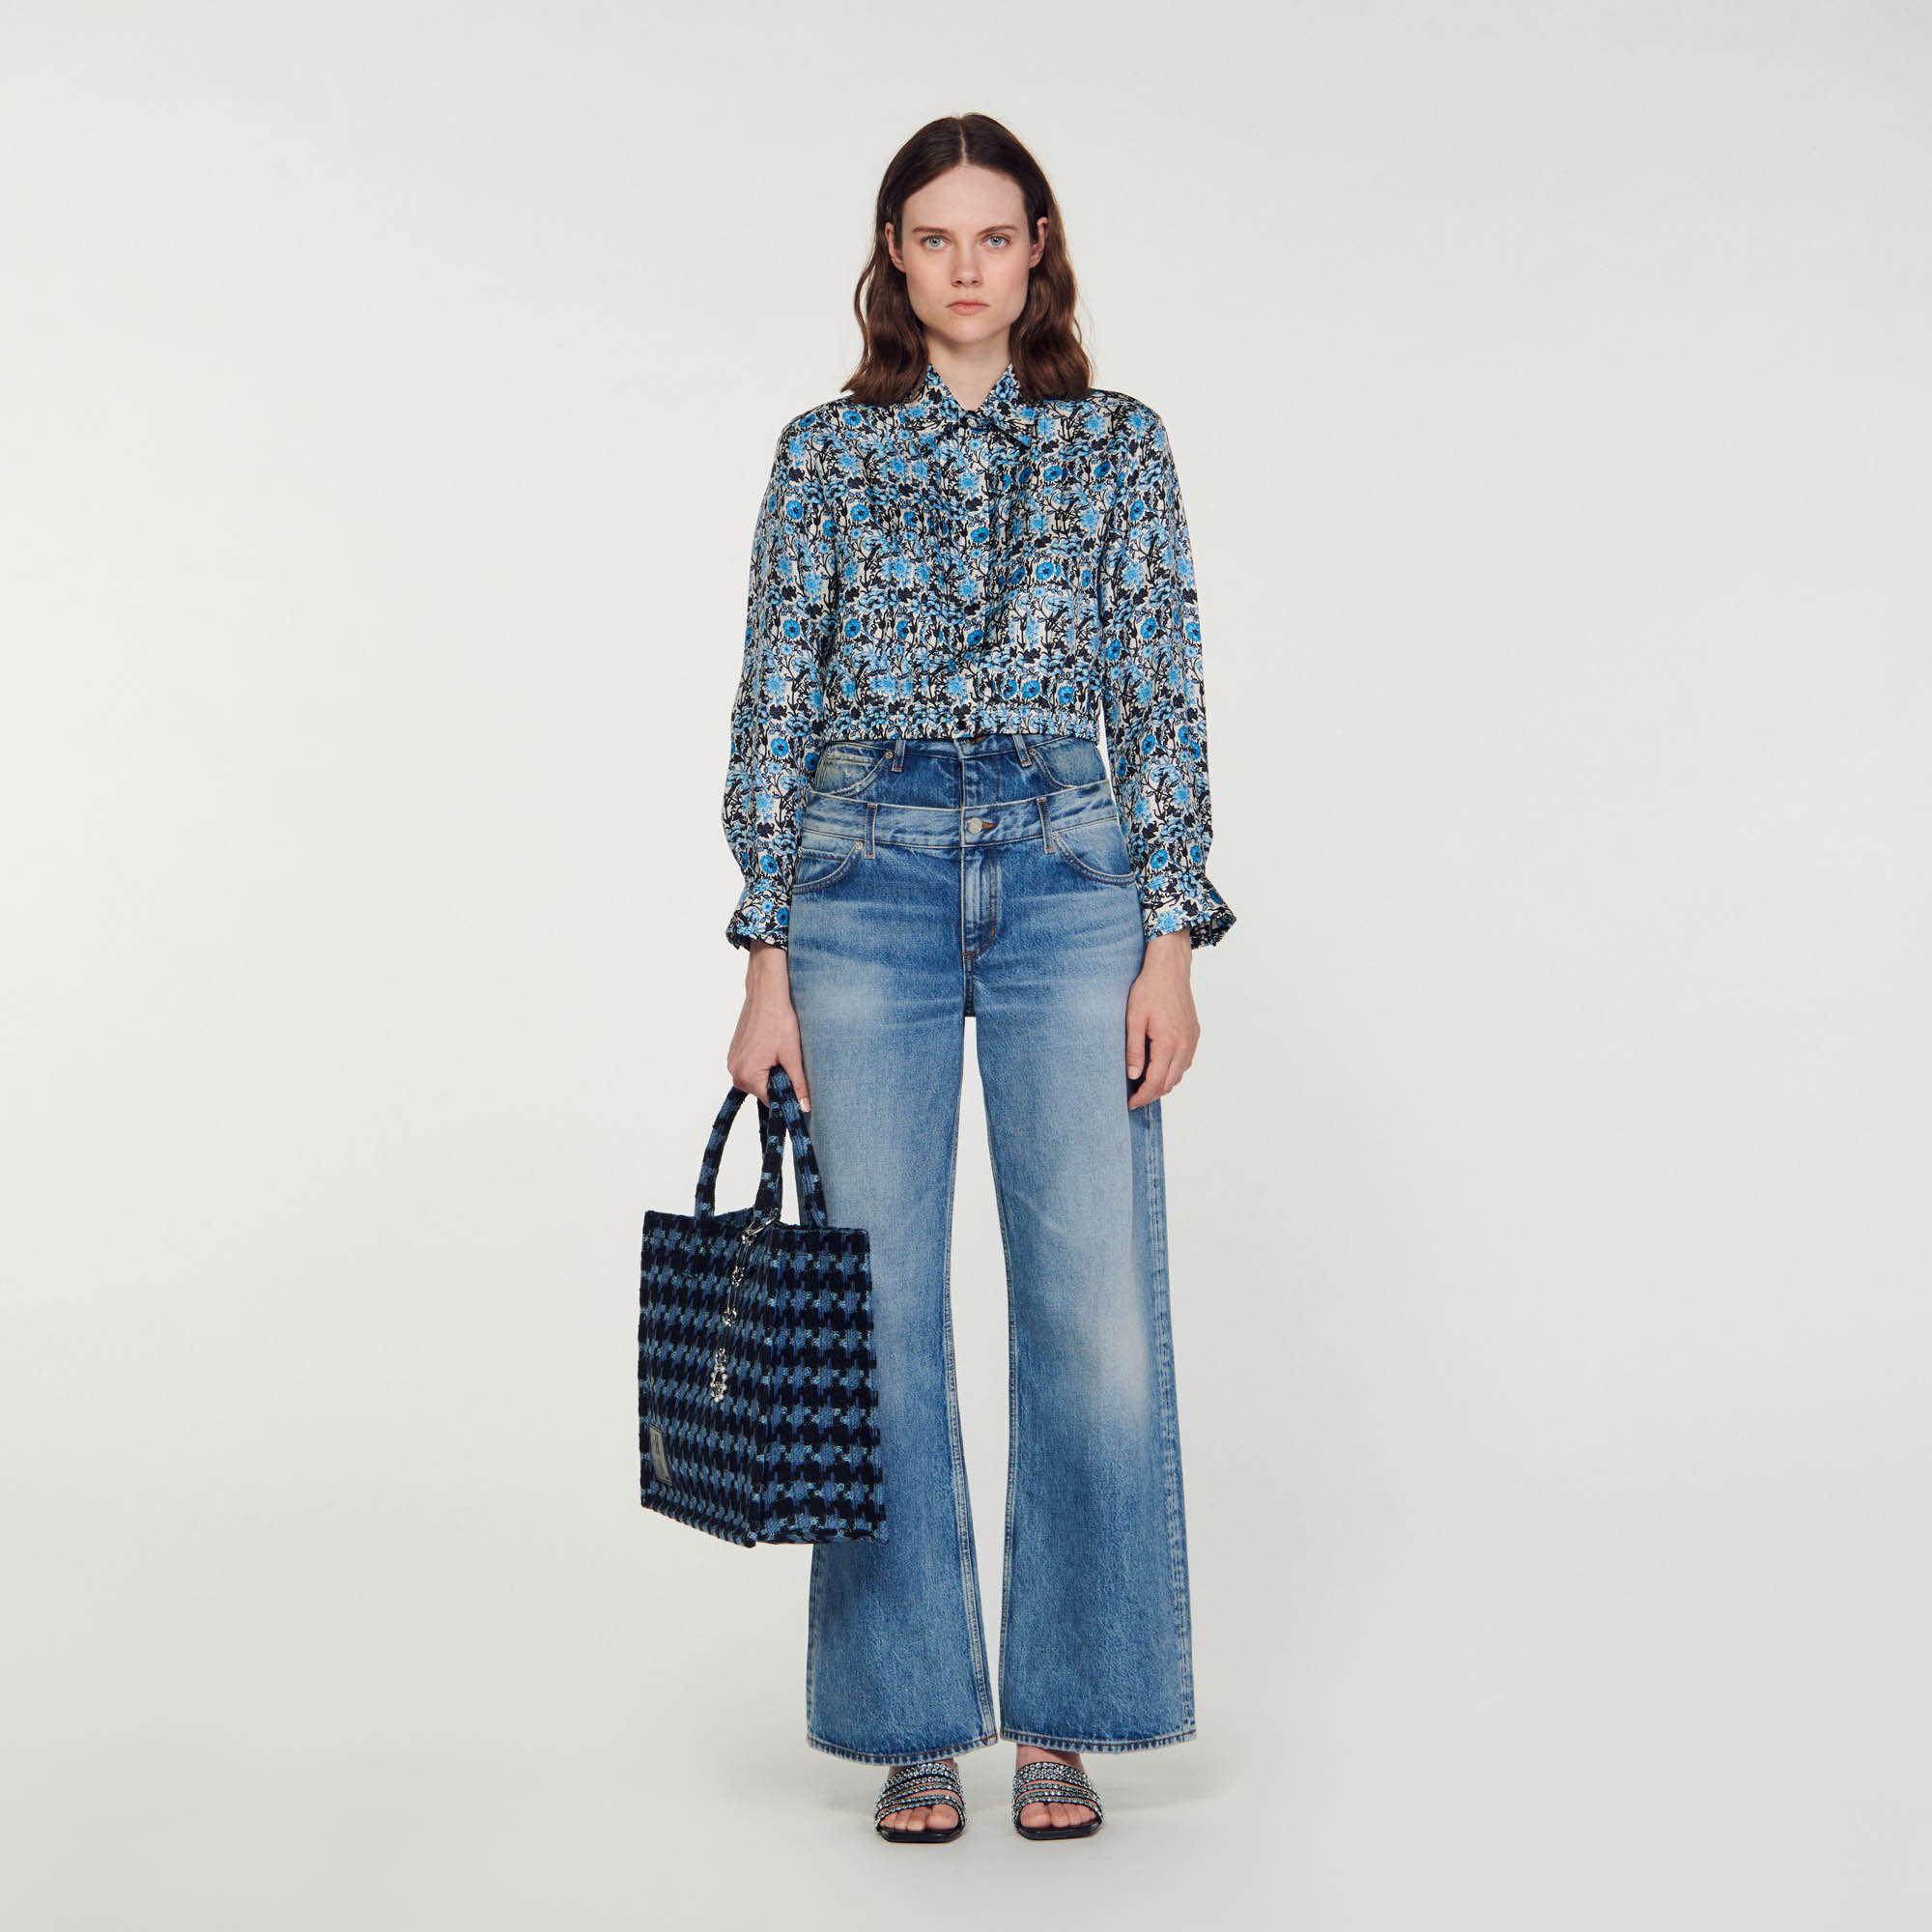 Sandro silk Buttons: Cropped silk shirt with a floral print, a collar, a button fastening, long sleeves with buttoned cuffs, and a shirred elastic waist